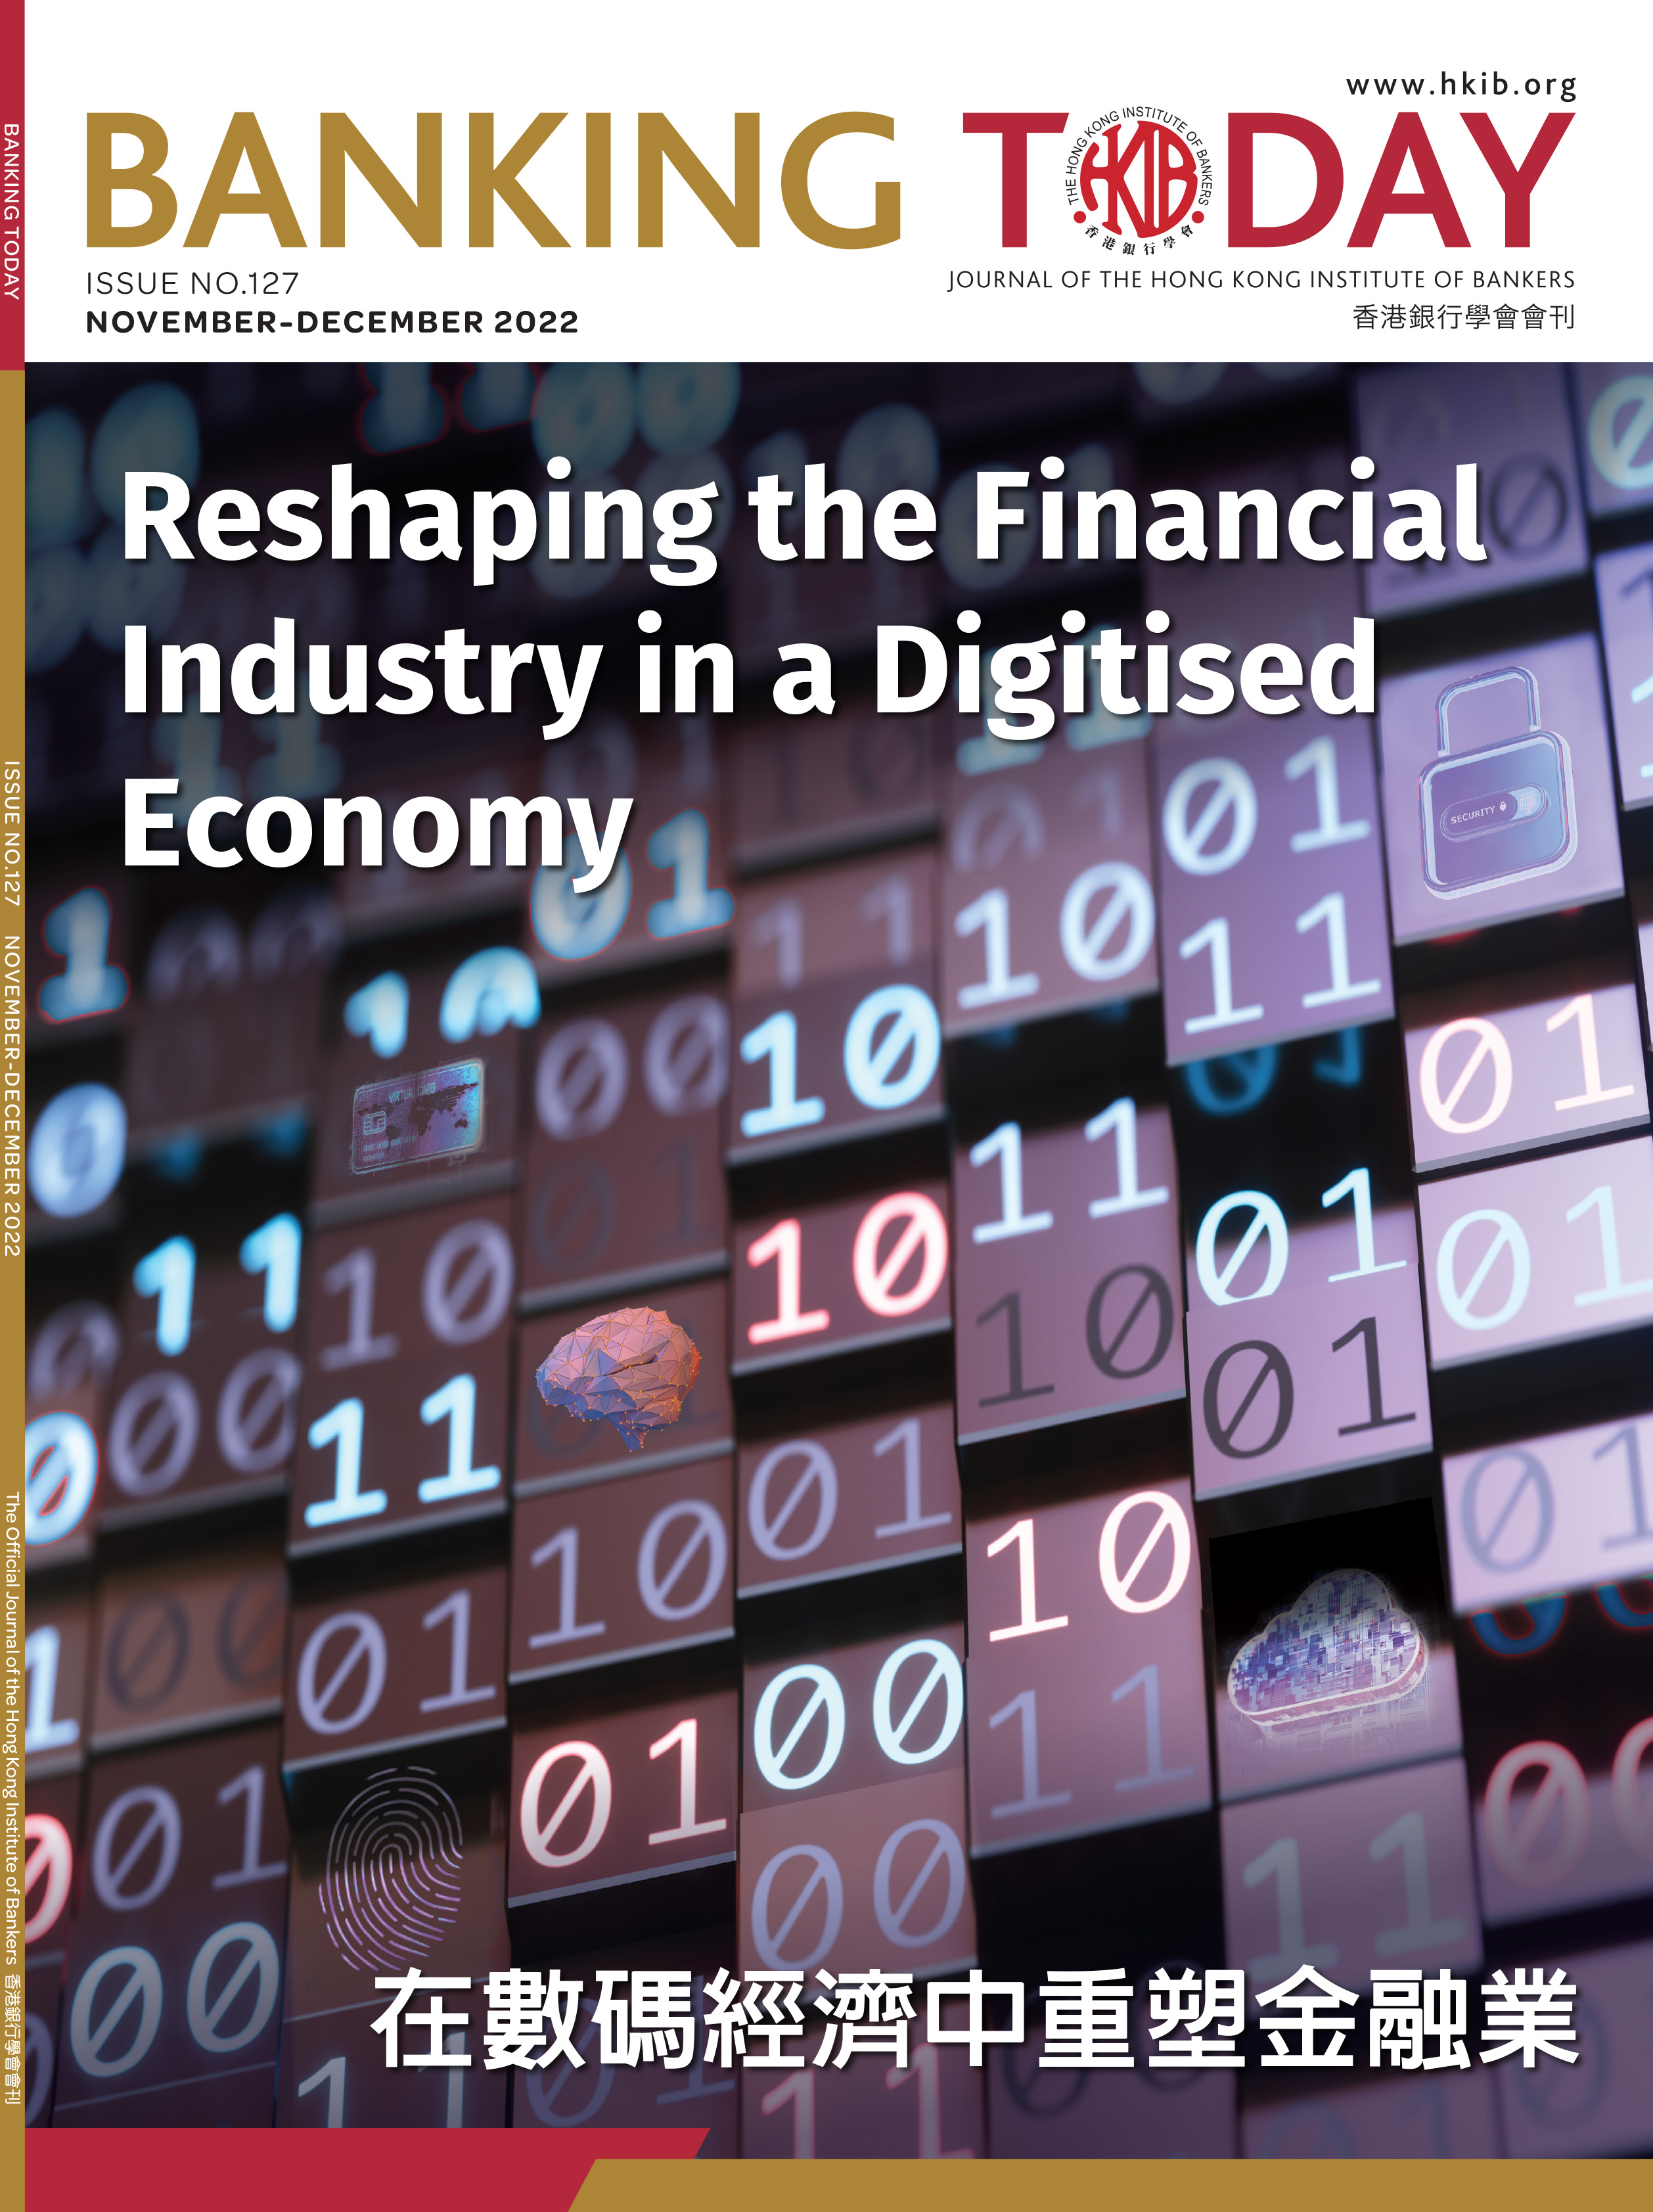 Reshaping the Financial Industry in a Digitised Economy